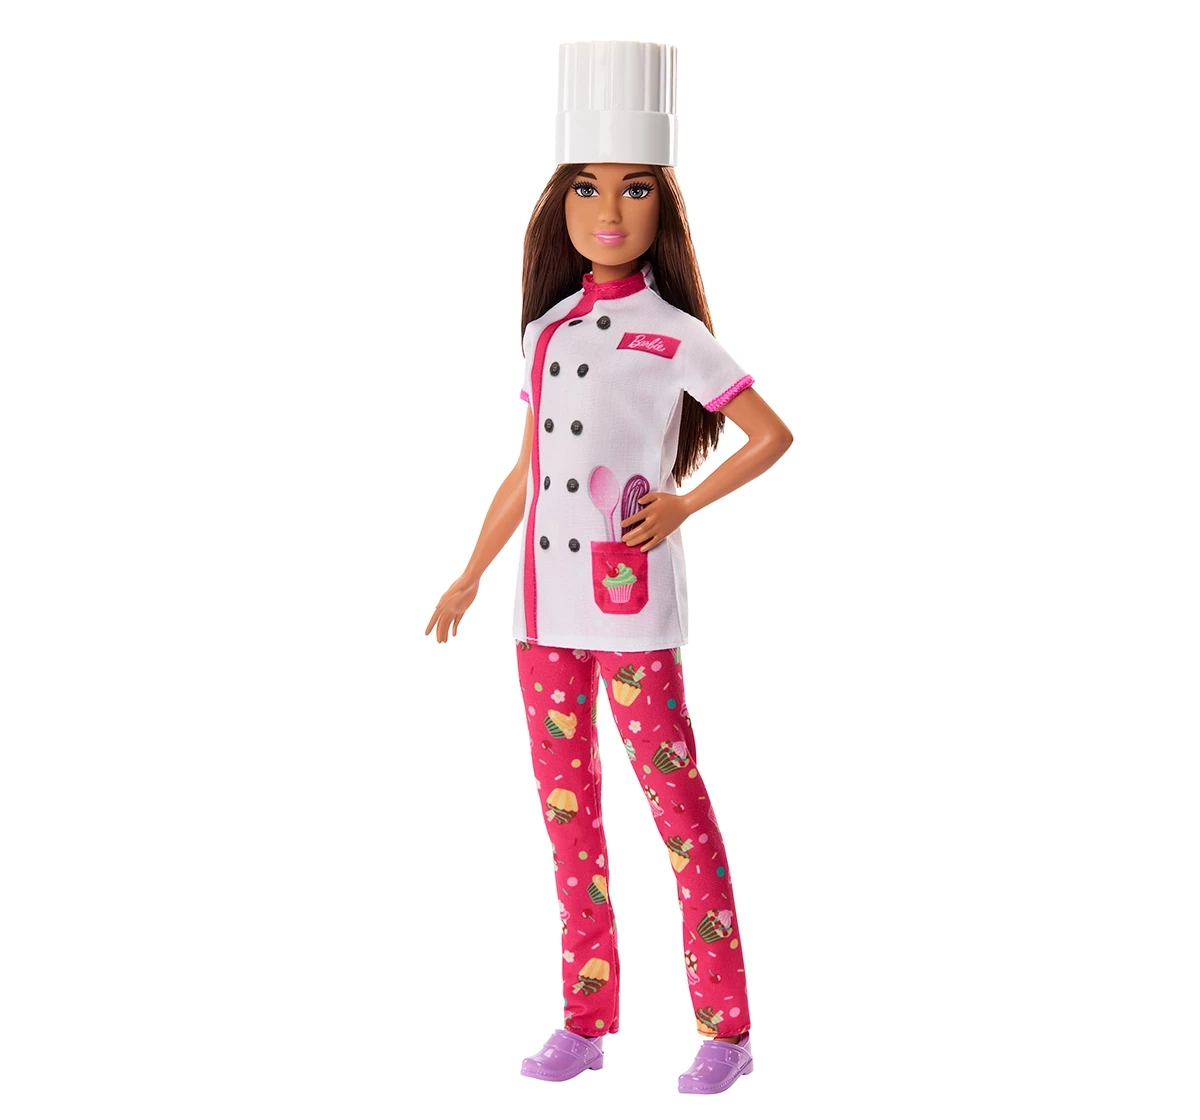 Barbie Doll & Accessories, Career Pastry Chef Doll with Hat, and Cake Slice, Kids for 3Y+, Multicolour